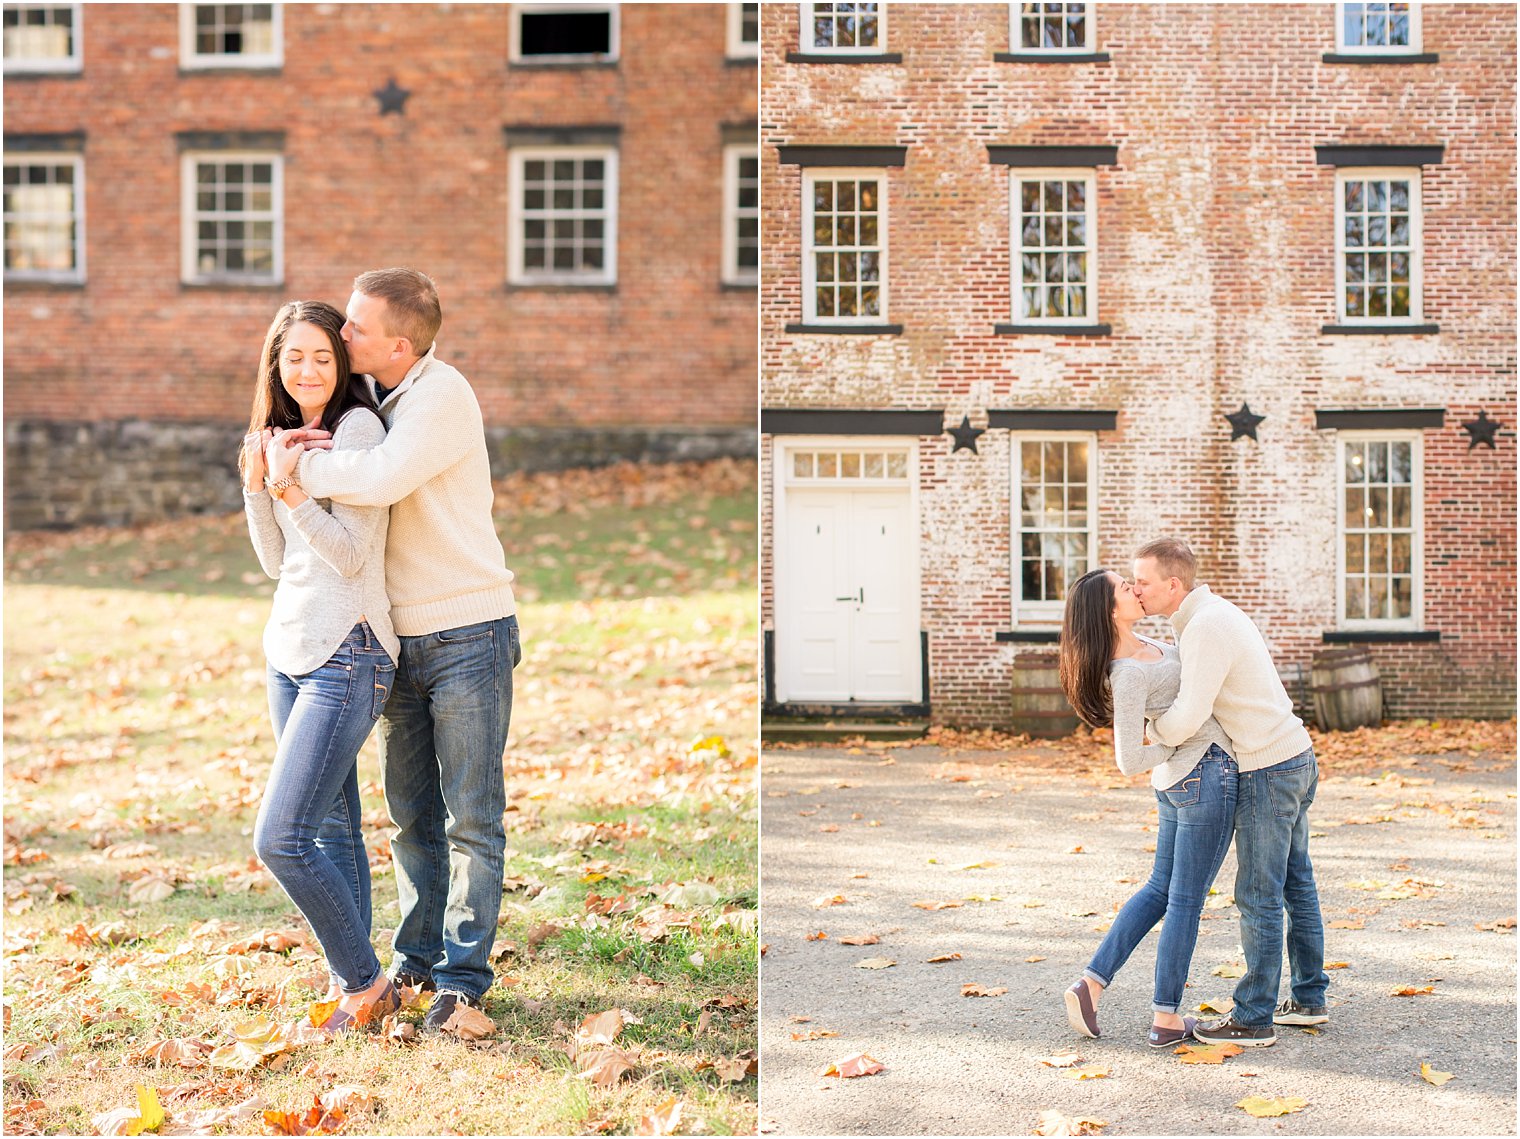 Casual engagement session at a park